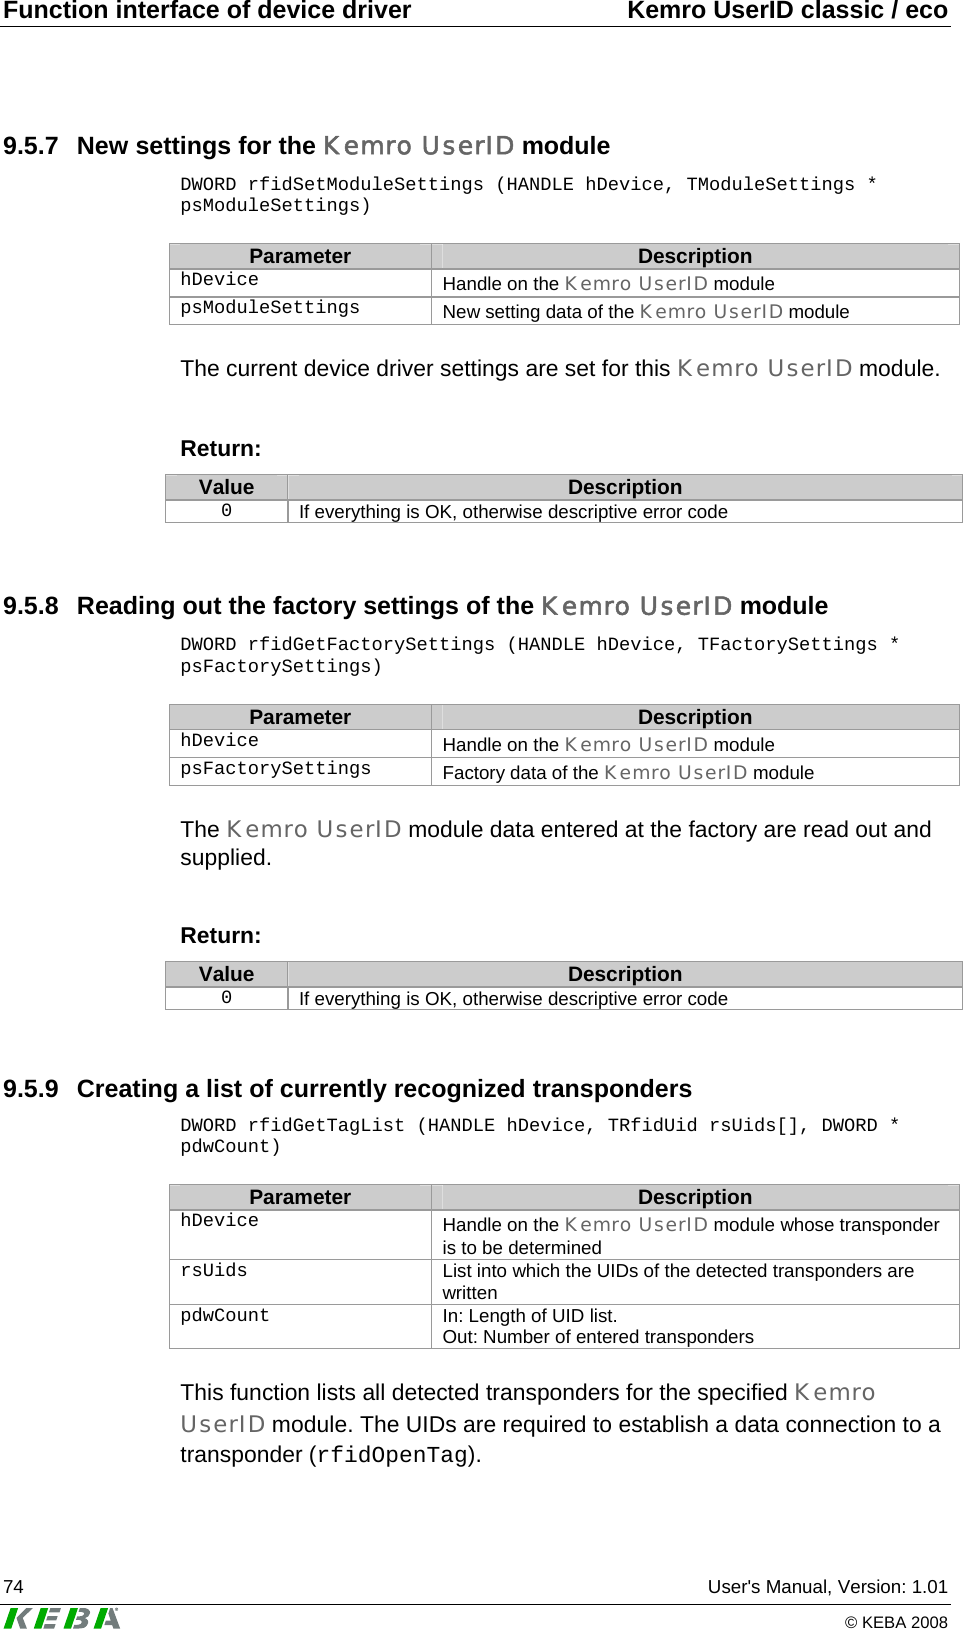 Function interface of device driver  Kemro UserID classic / eco 74  User&apos;s Manual, Version: 1.01   © KEBA 2008 9.5.7  New settings for the Kemro UserID module DWORD rfidSetModuleSettings (HANDLE hDevice, TModuleSettings * psModuleSettings)  Parameter  Description hDevice   Handle on the Kemro UserID module psModuleSettings   New setting data of the Kemro UserID module  The current device driver settings are set for this Kemro UserID module.  Return: Value  Description 0  If everything is OK, otherwise descriptive error code  9.5.8  Reading out the factory settings of the Kemro UserID module DWORD rfidGetFactorySettings (HANDLE hDevice, TFactorySettings * psFactorySettings)  Parameter  Description hDevice   Handle on the Kemro UserID module psFactorySettings   Factory data of the Kemro UserID module  The Kemro UserID module data entered at the factory are read out and supplied.   Return: Value  Description 0  If everything is OK, otherwise descriptive error code  9.5.9  Creating a list of currently recognized transponders DWORD rfidGetTagList (HANDLE hDevice, TRfidUid rsUids[], DWORD * pdwCount)  Parameter  Description hDevice   Handle on the Kemro UserID module whose transponder is to be determined rsUids   List into which the UIDs of the detected transponders are written pdwCount   In: Length of UID list.  Out: Number of entered transponders  This function lists all detected transponders for the specified Kemro UserID module. The UIDs are required to establish a data connection to a transponder (rfidOpenTag).   